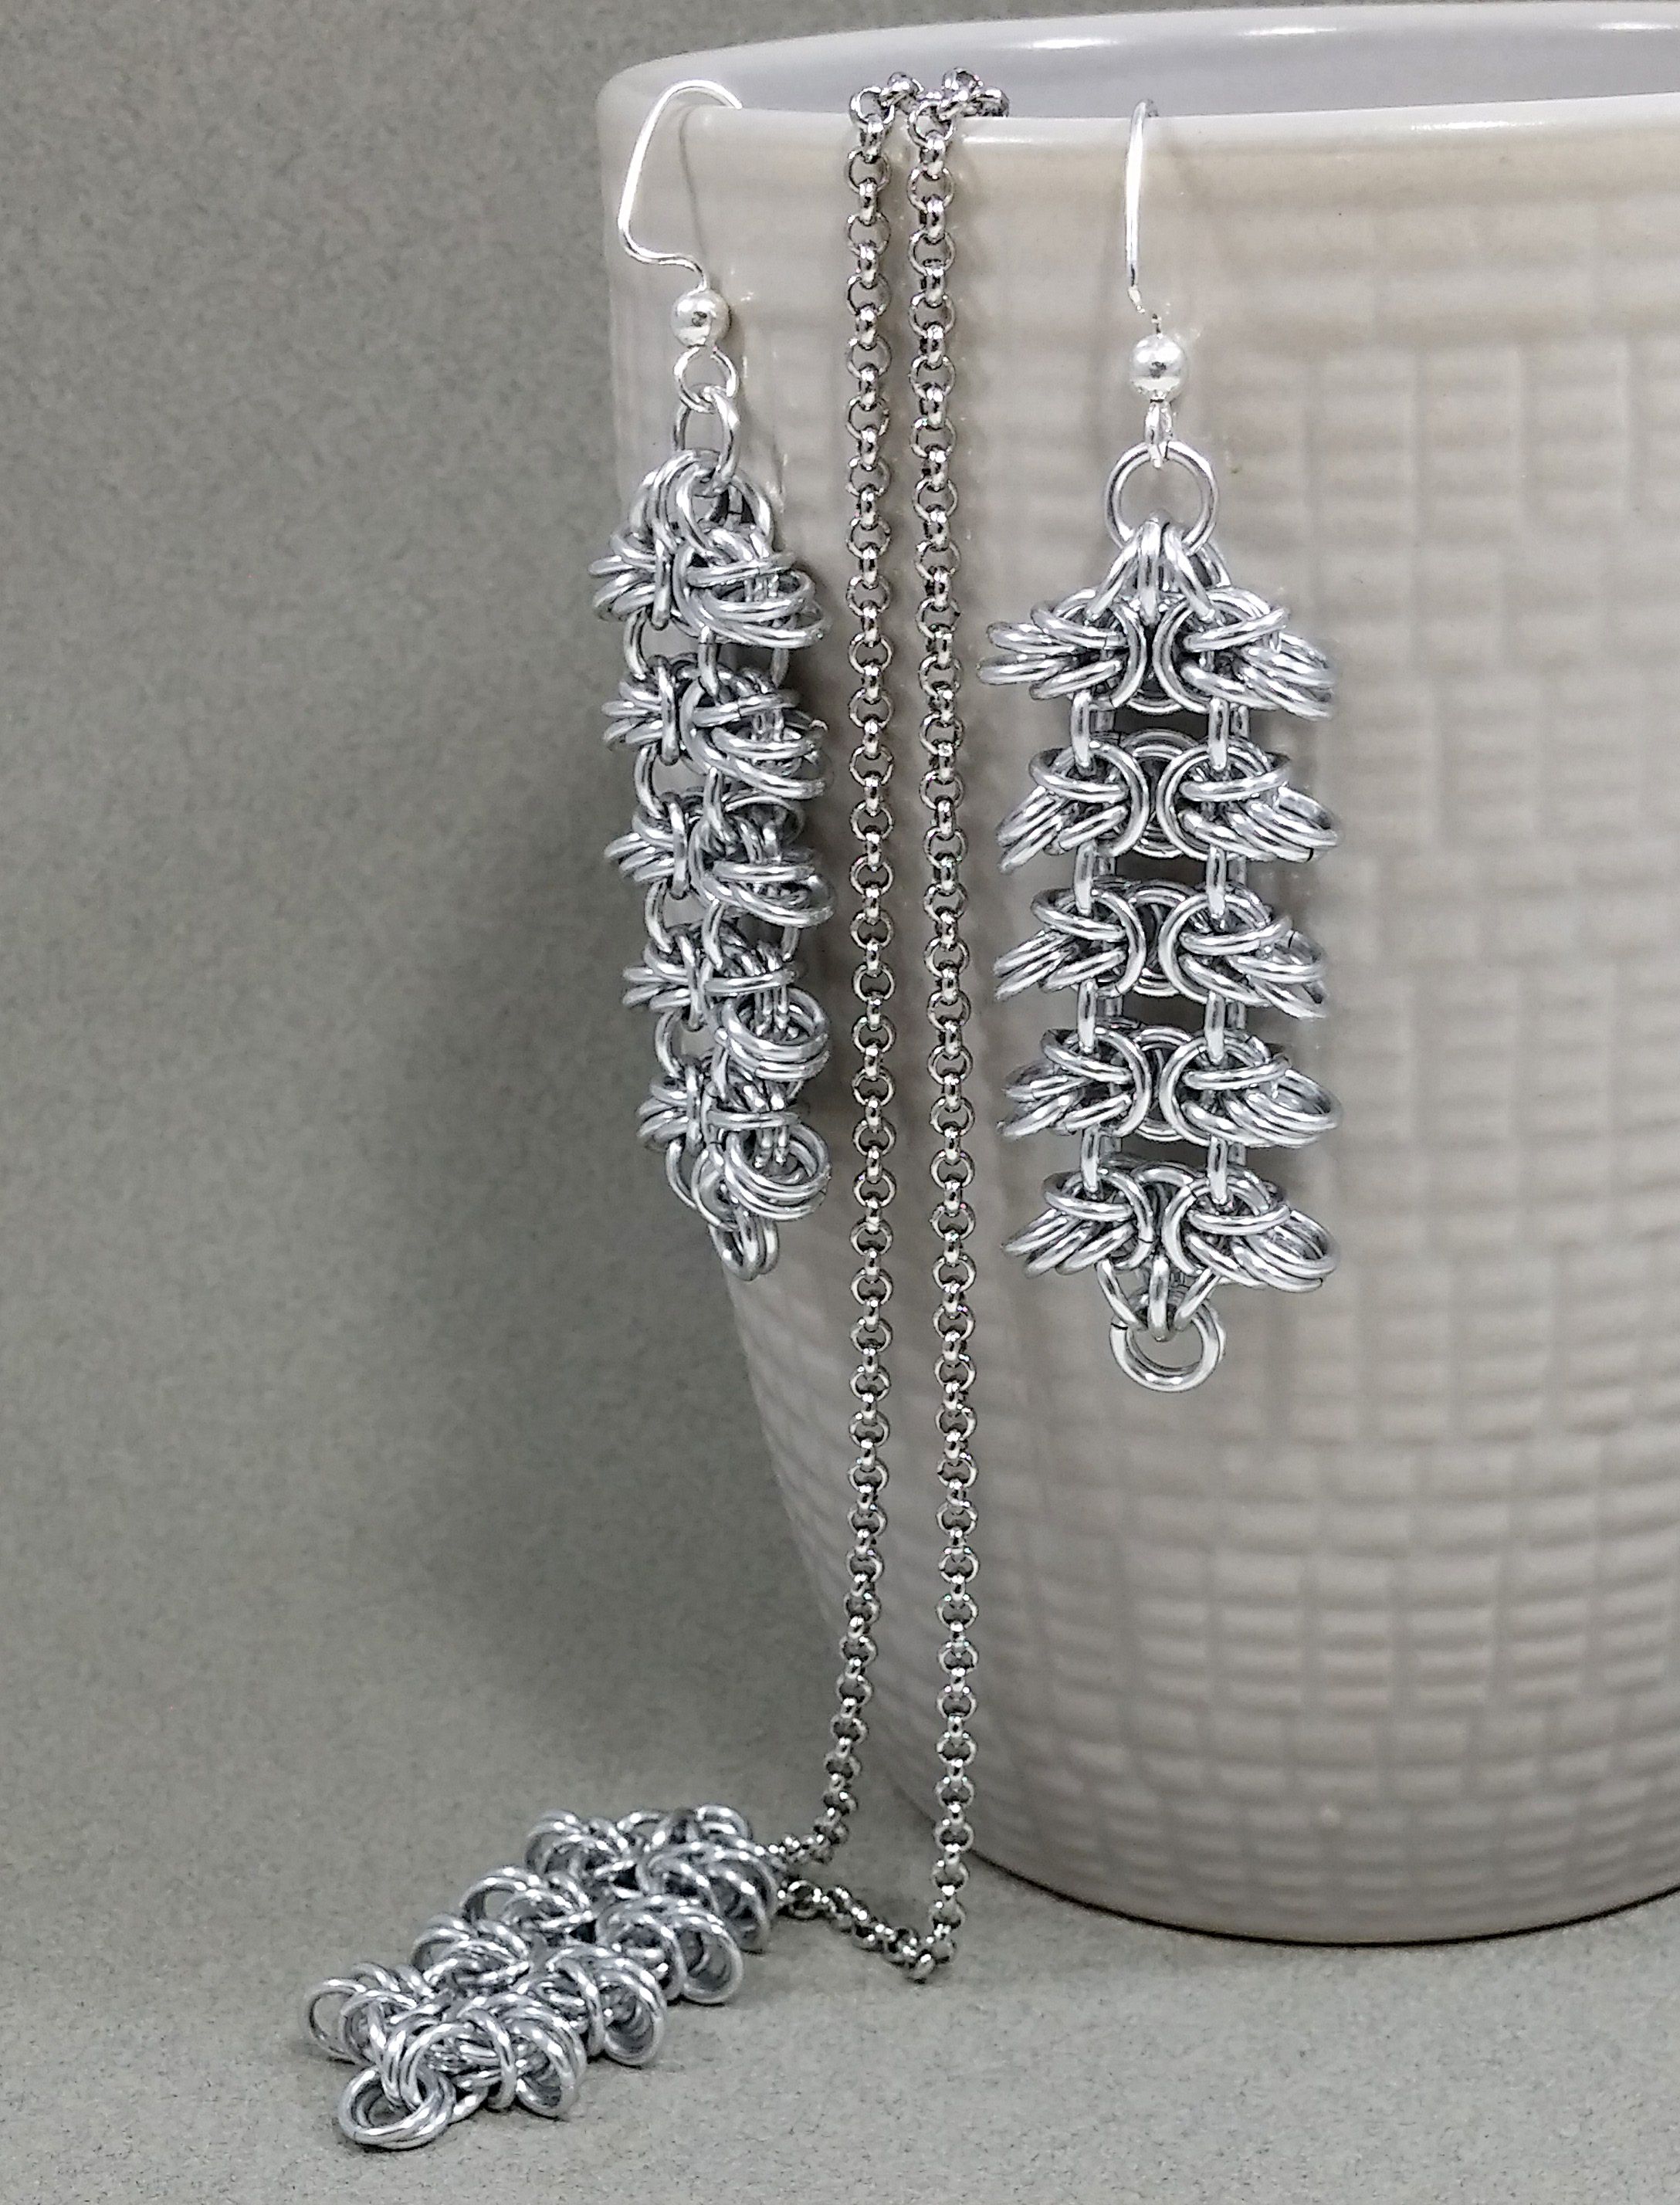 Earrings And Necklace Silver Aluminium Chain Mail Jewelry Set - 